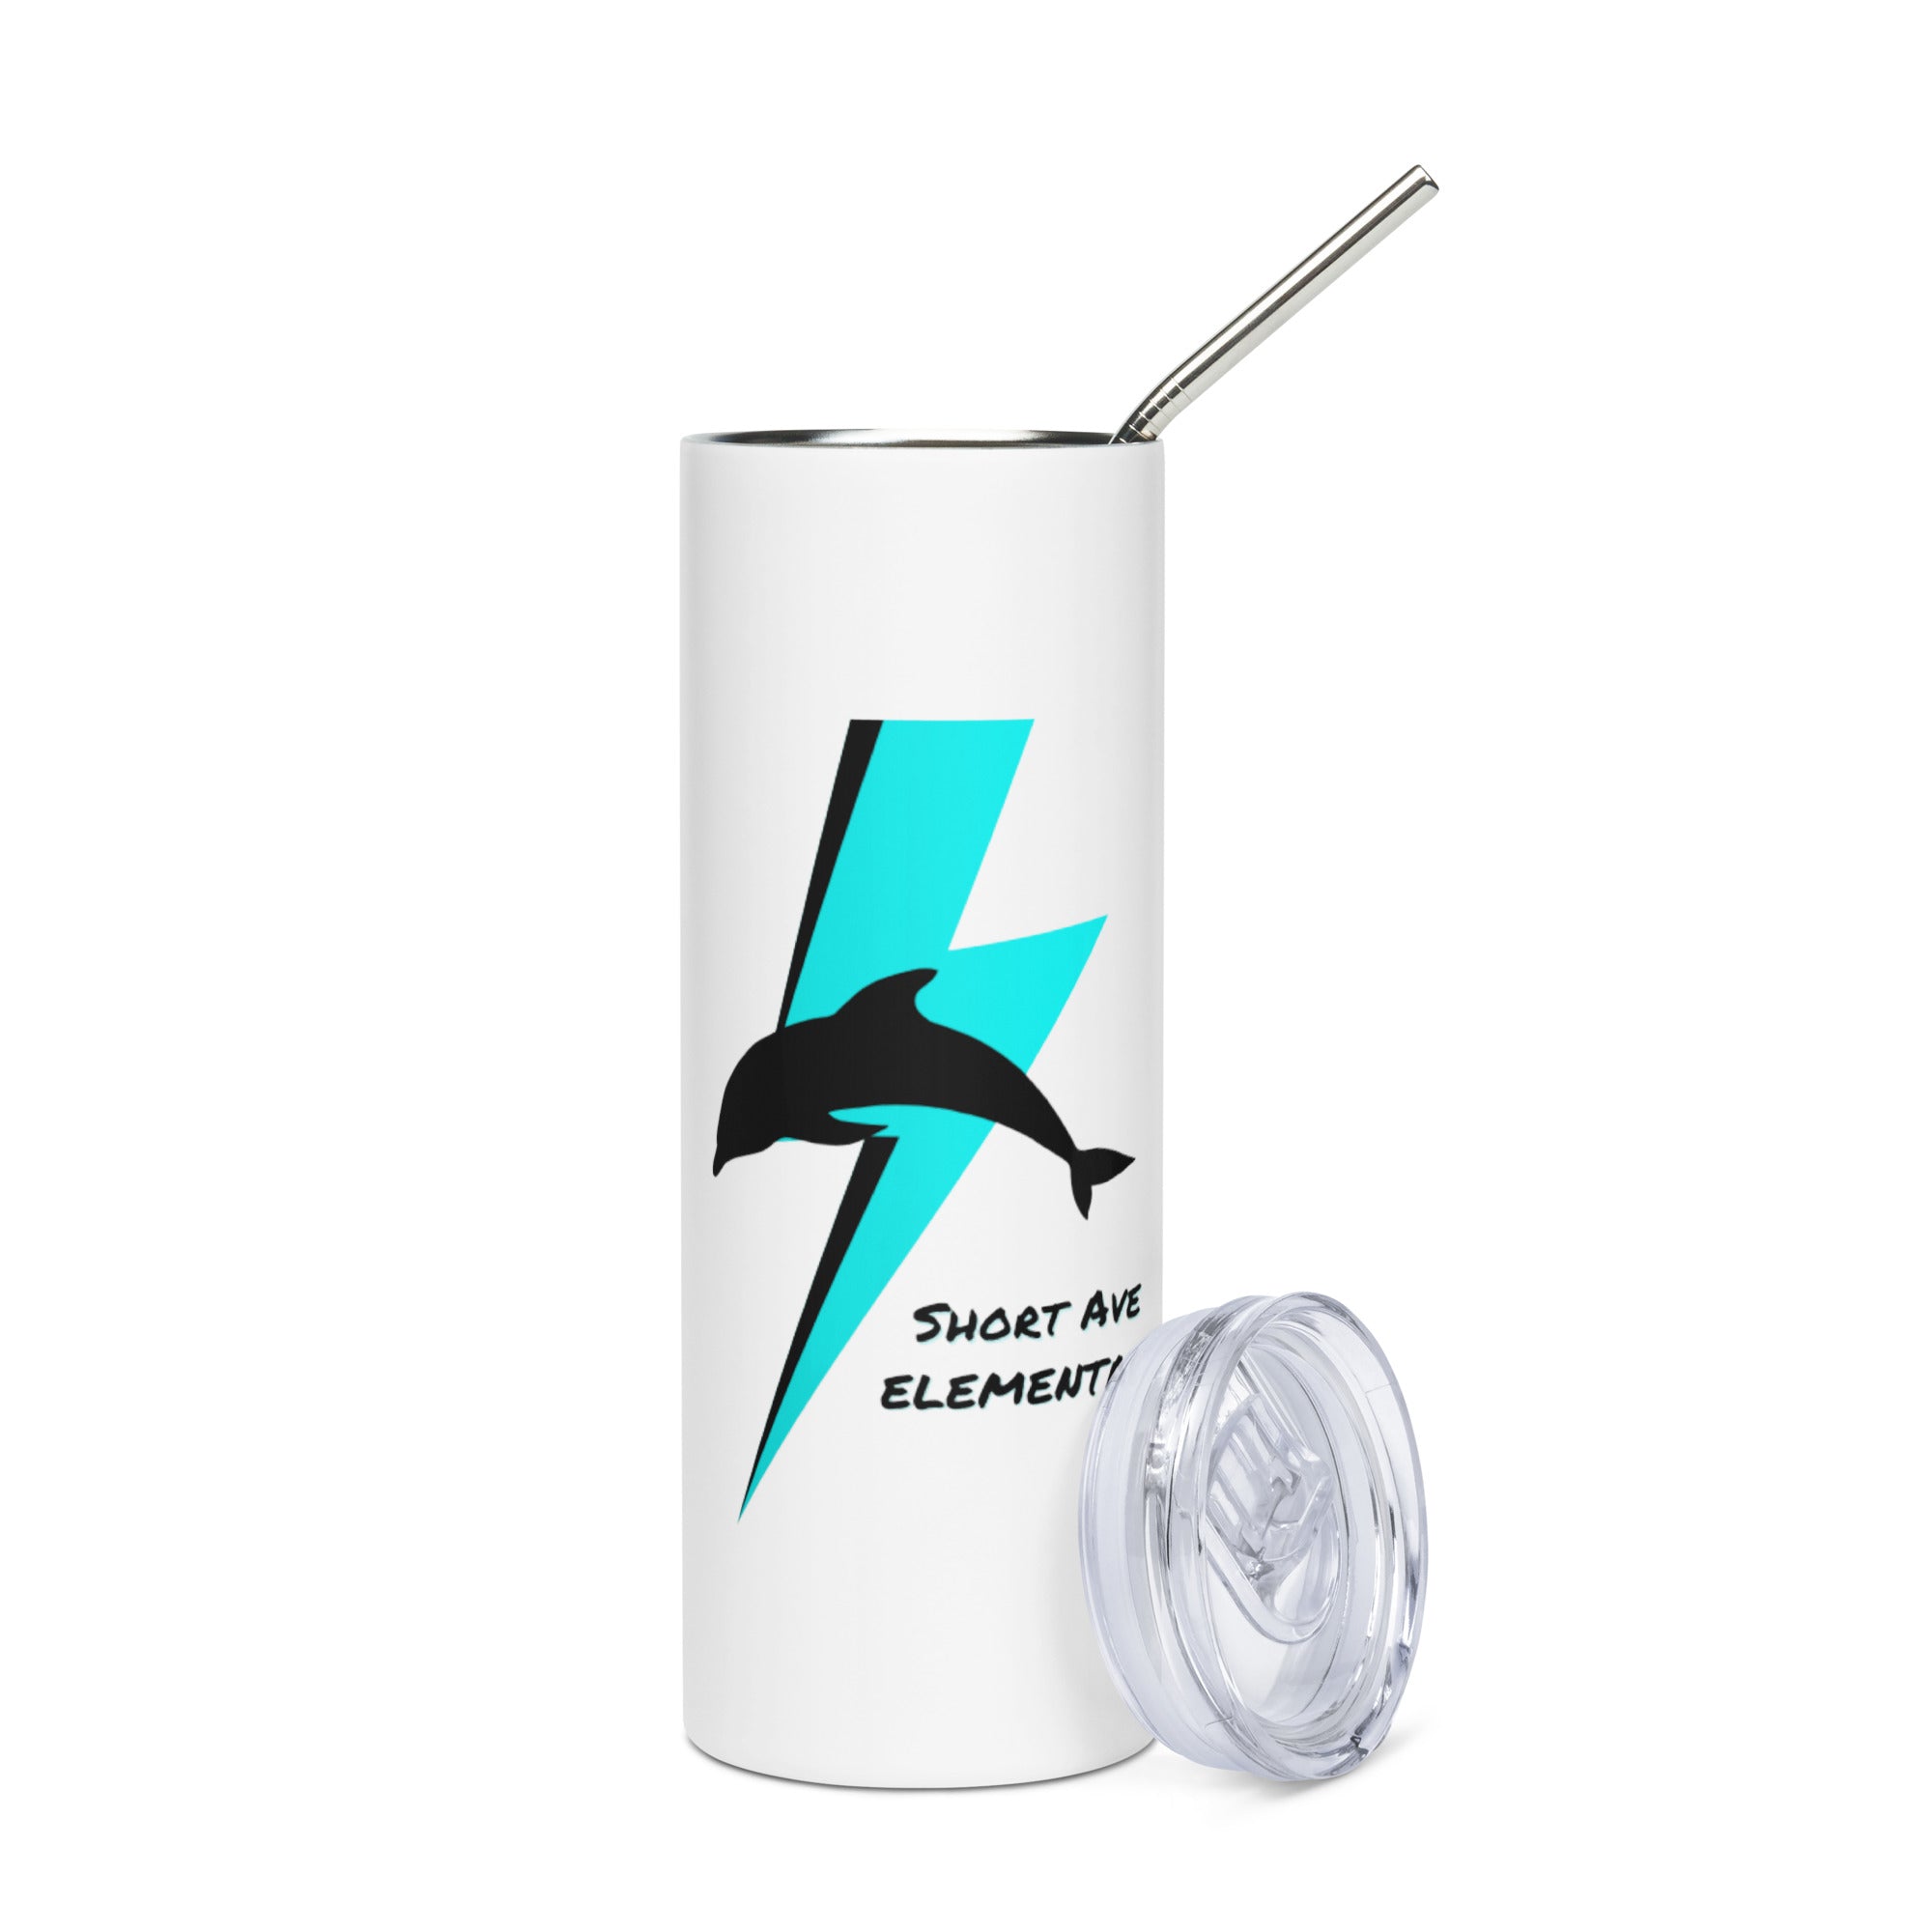 Short Ave Logo Stainless Steel Tumbler with Metal Straw